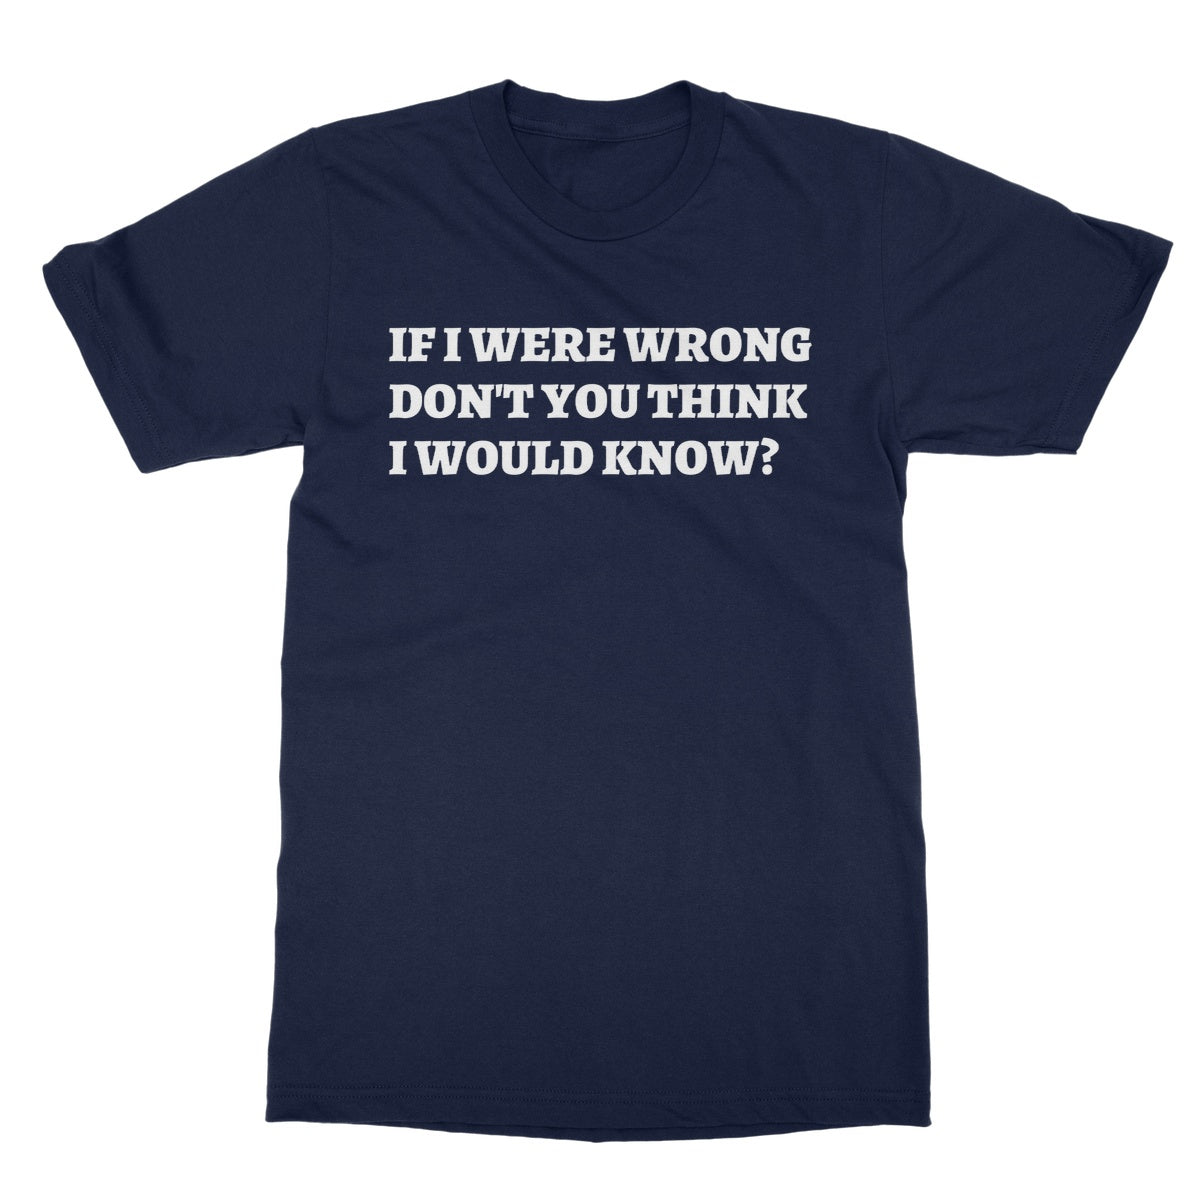 if I were wrong don't you think I would know t shirt navy